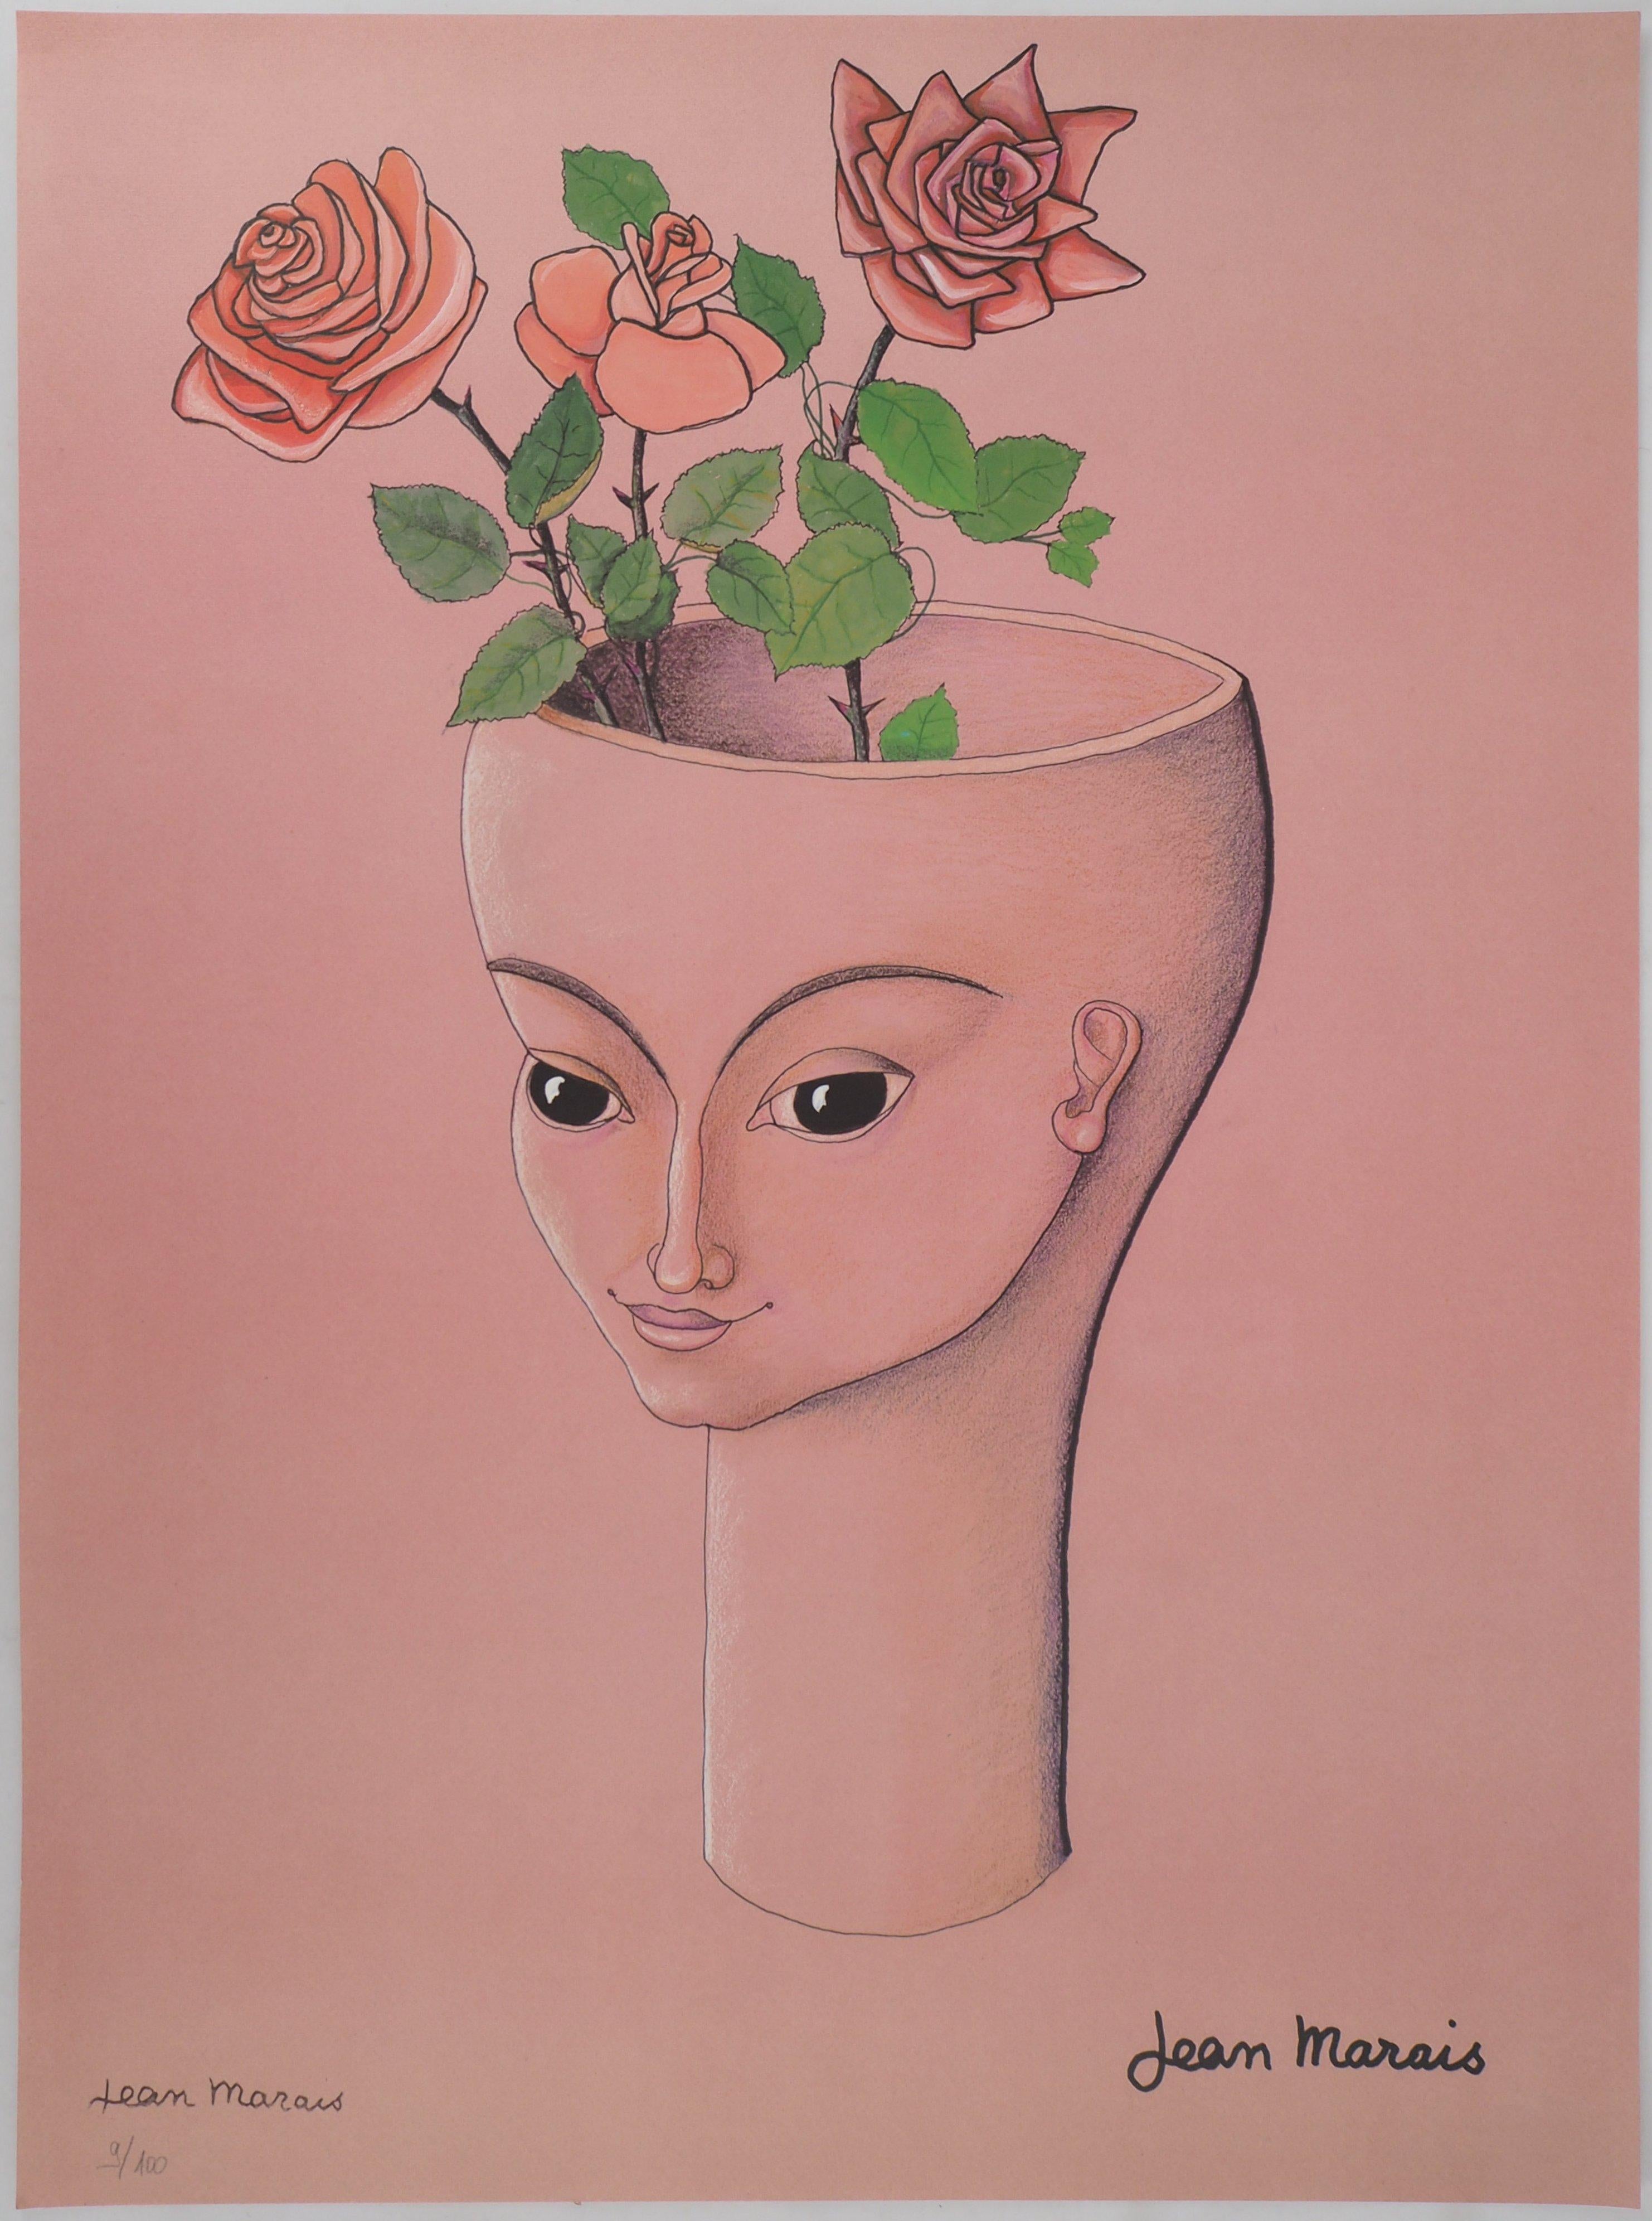 Jean Marais Portrait Print - Woman with Three Roses - Lithograph - Numbered / 100